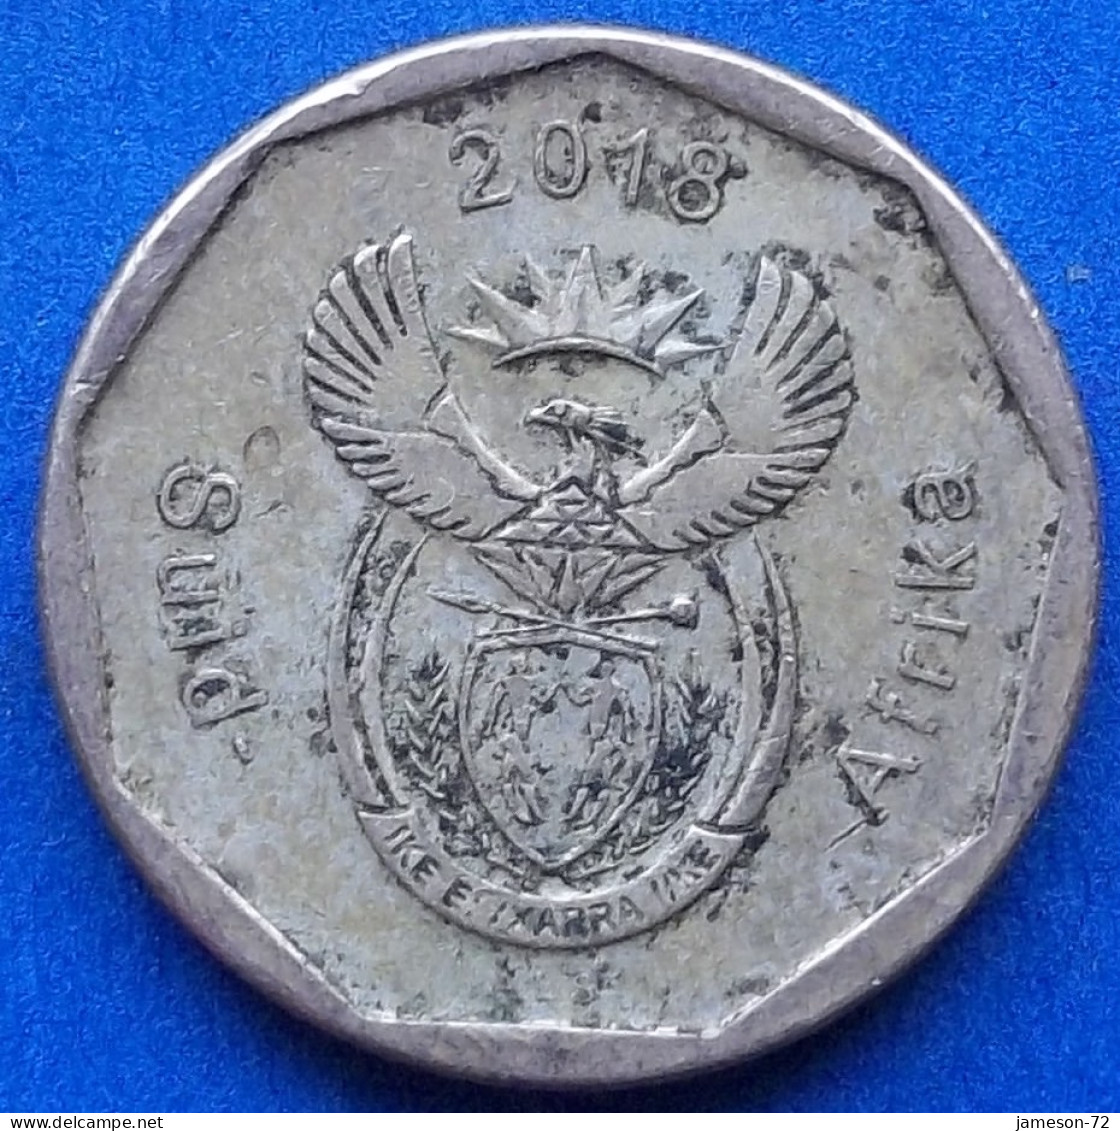 SOUTH AFRICA - 20 Cents 2018 "Protea Flower" KM# 442 Republic (1961) - Edelweiss Coins - South Africa